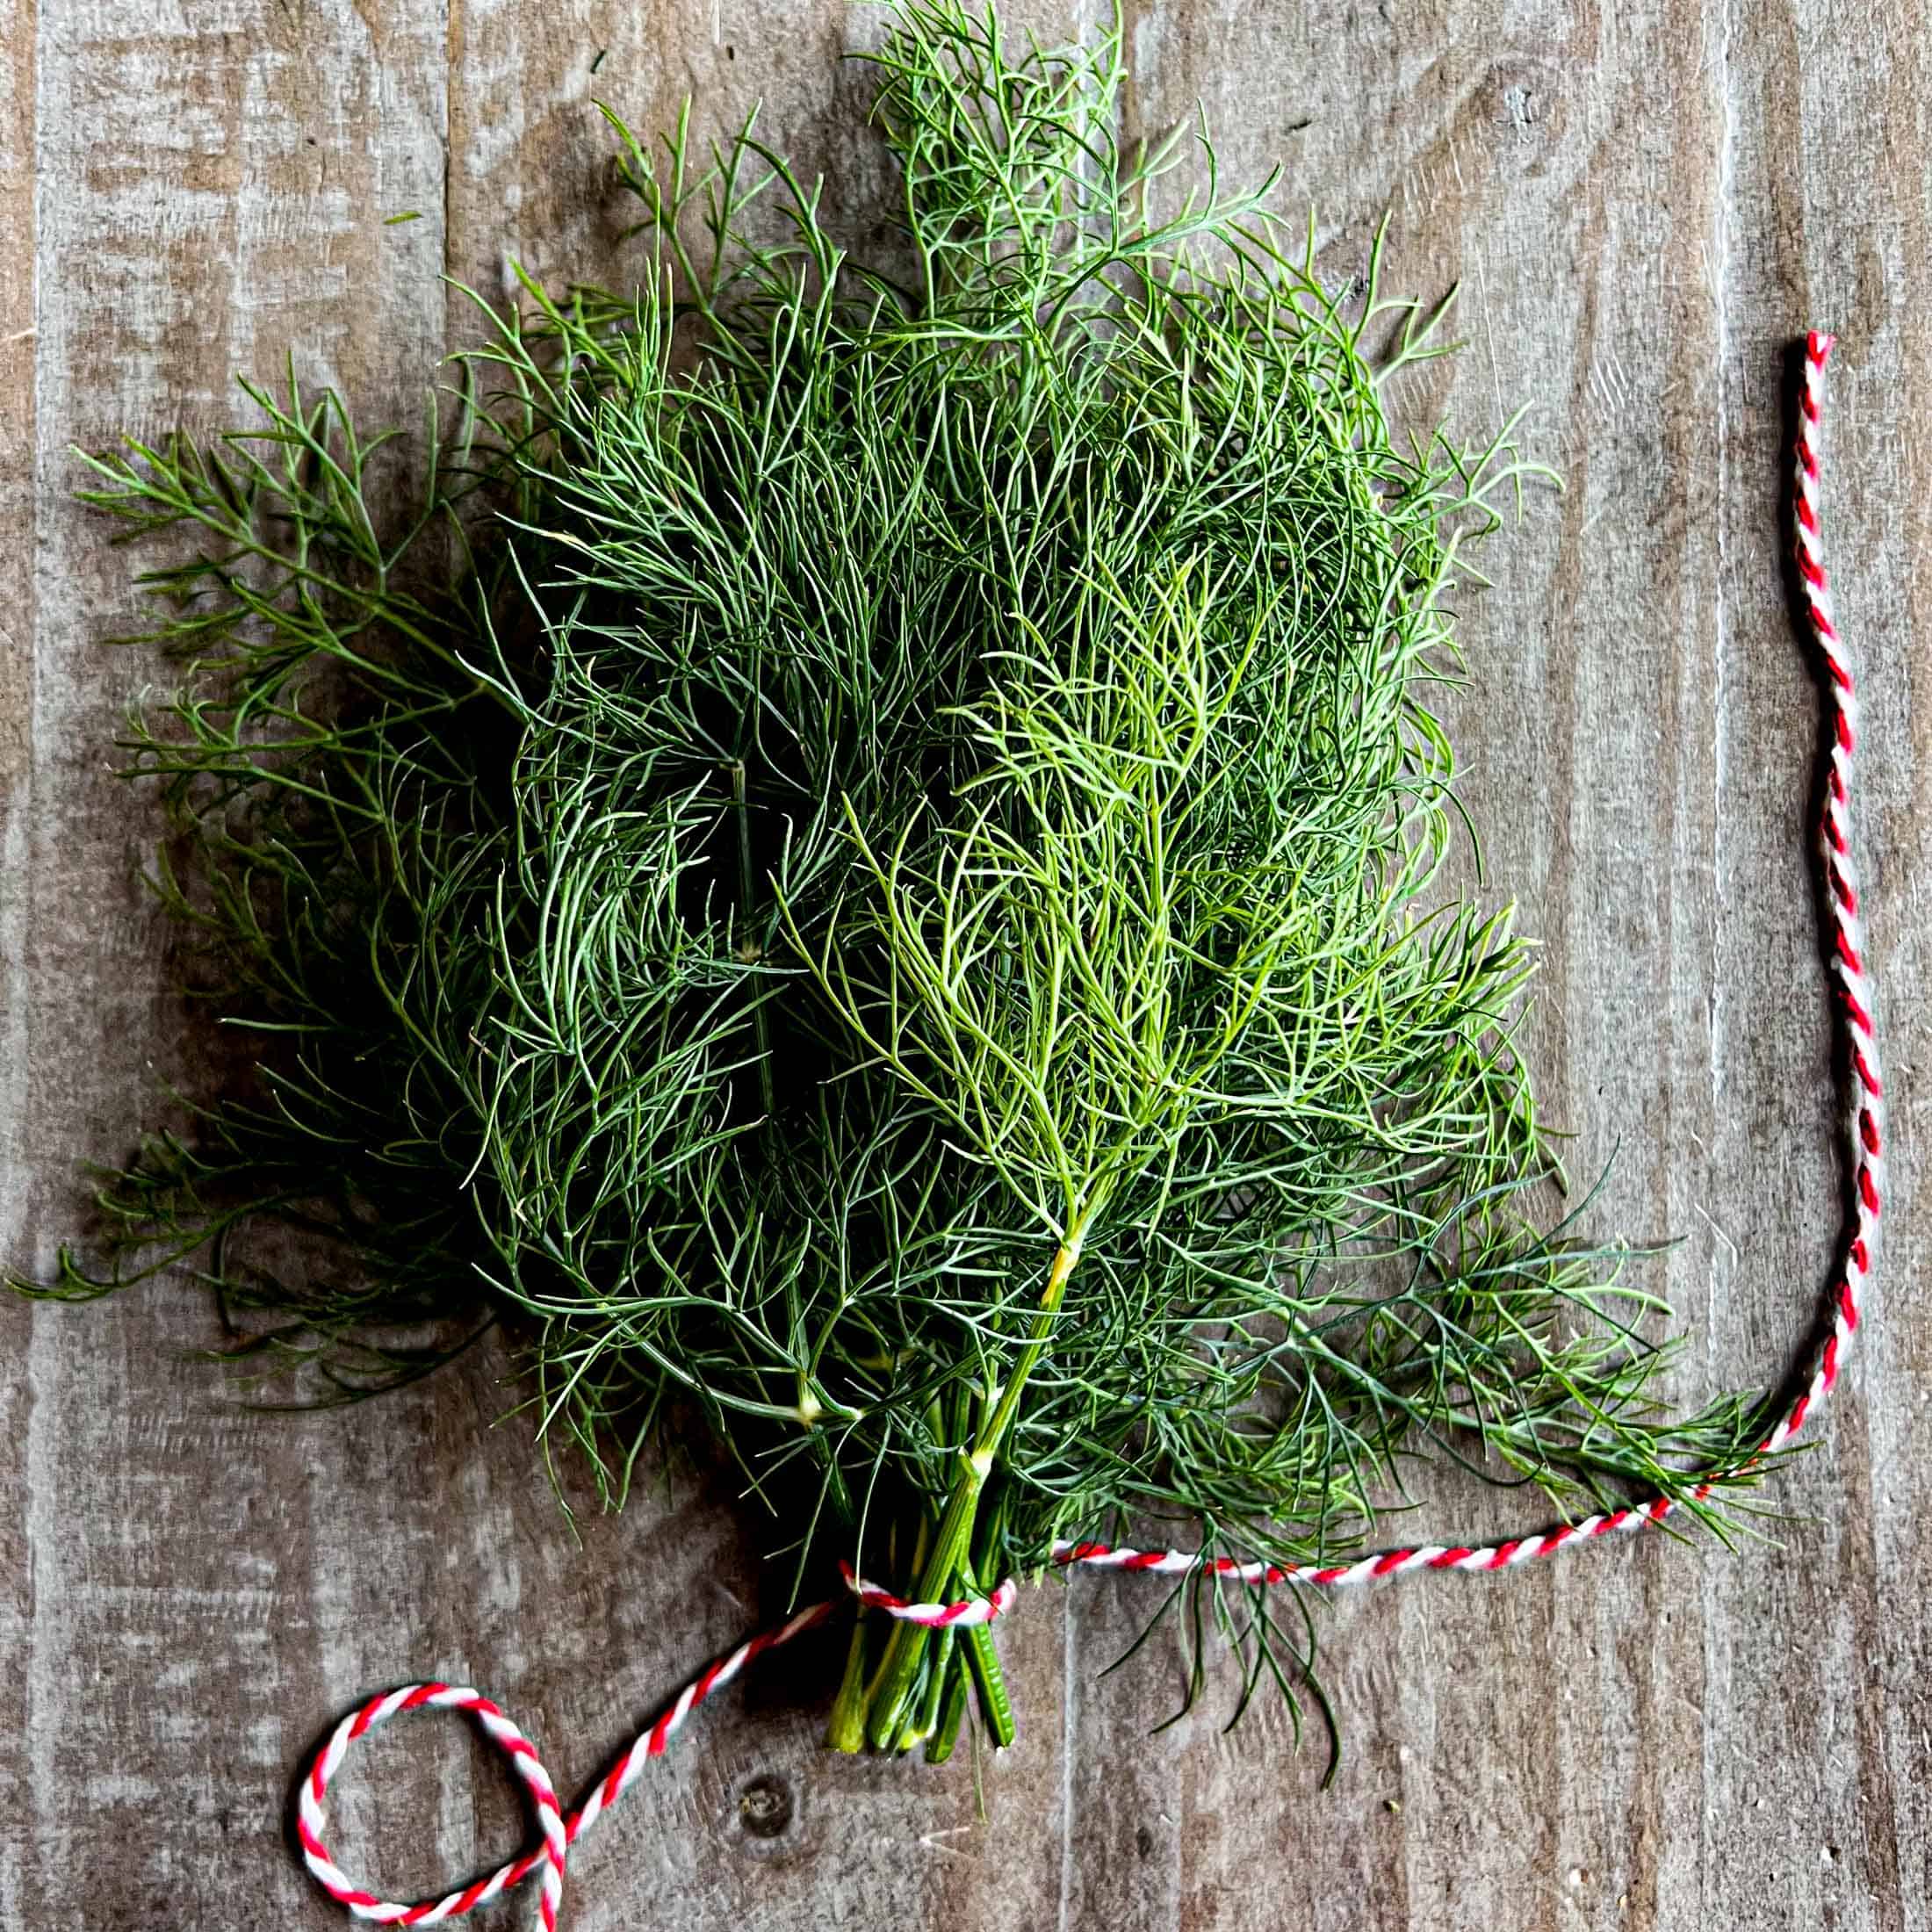 A bundle of dill tied up with red and white butcher's string.